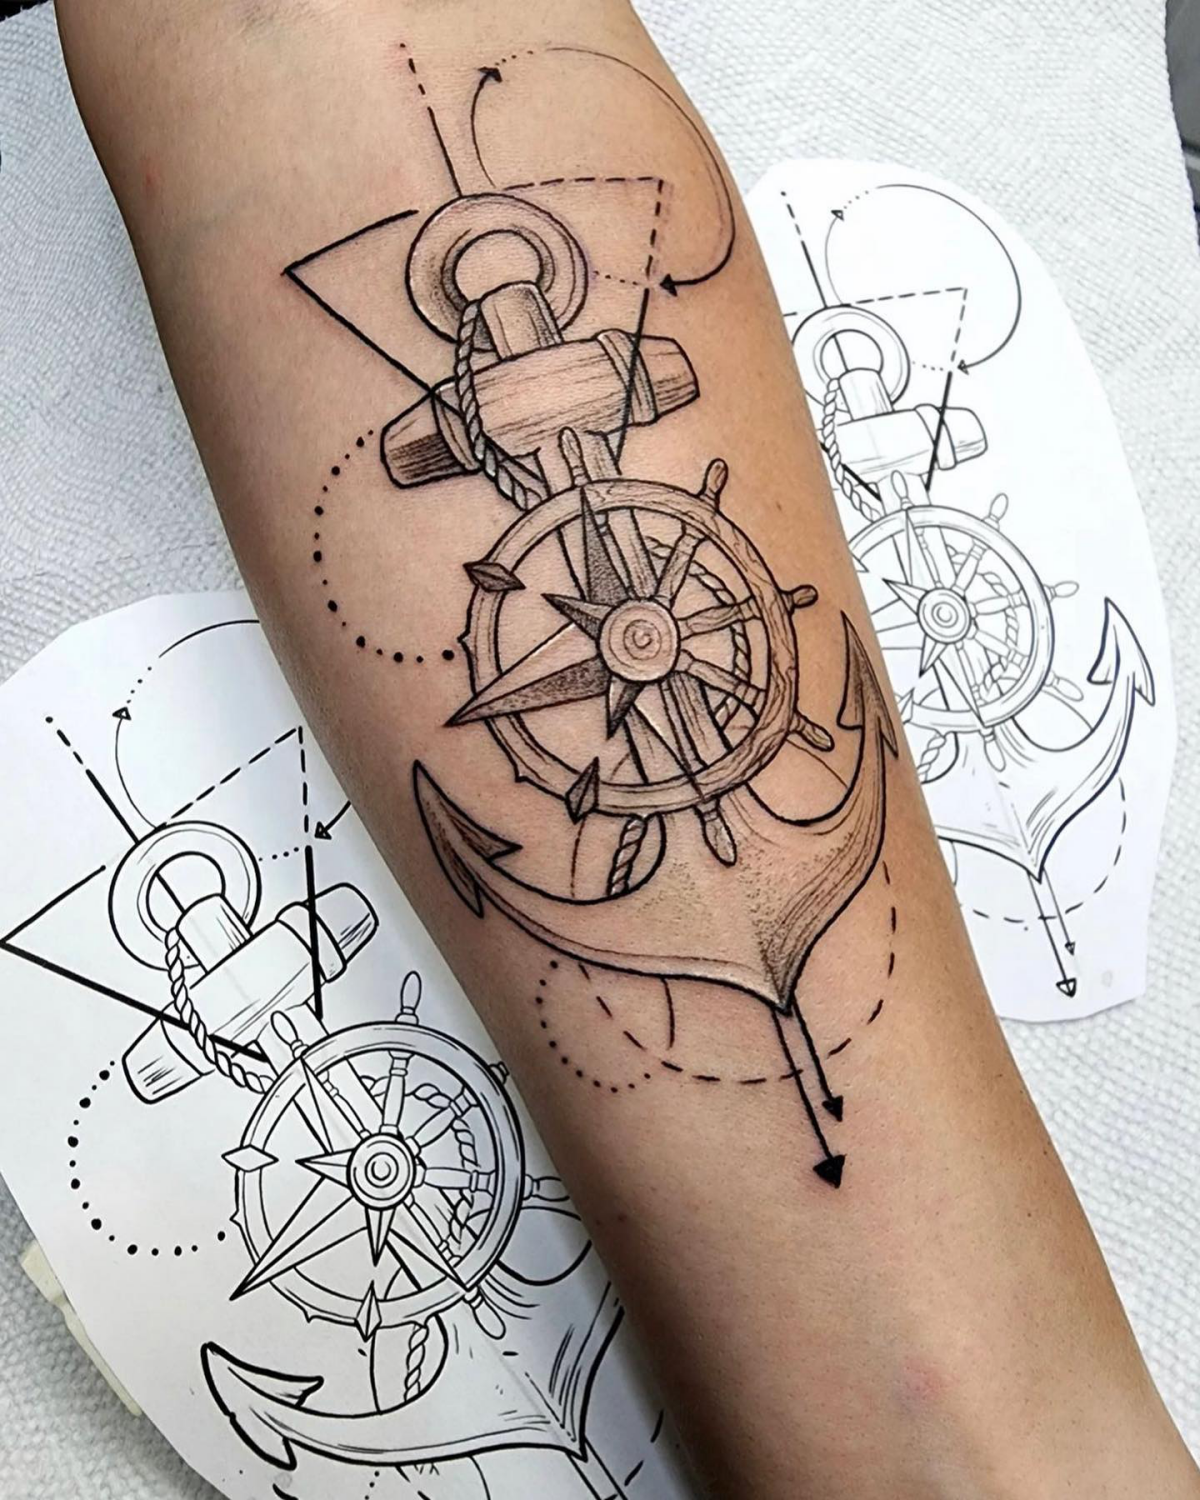 10 Amazing Anchor Tattoo Ideas You Will Love